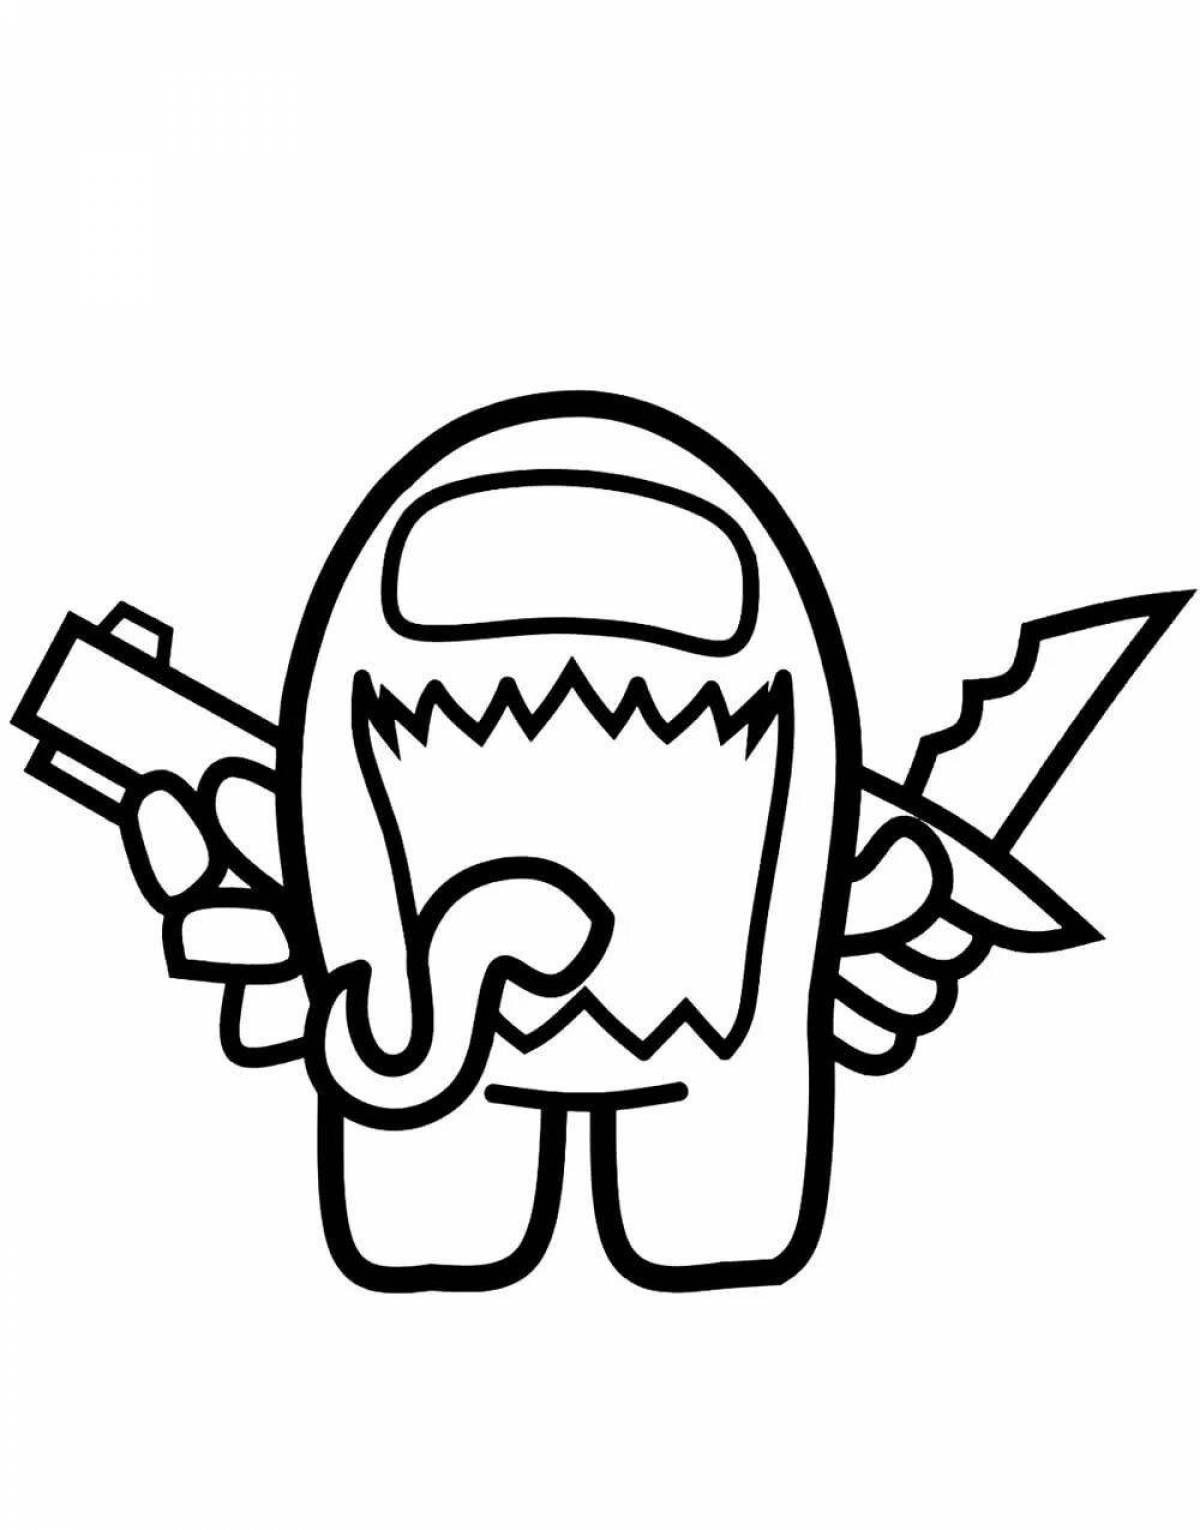 Zombie ghost ace coloring page